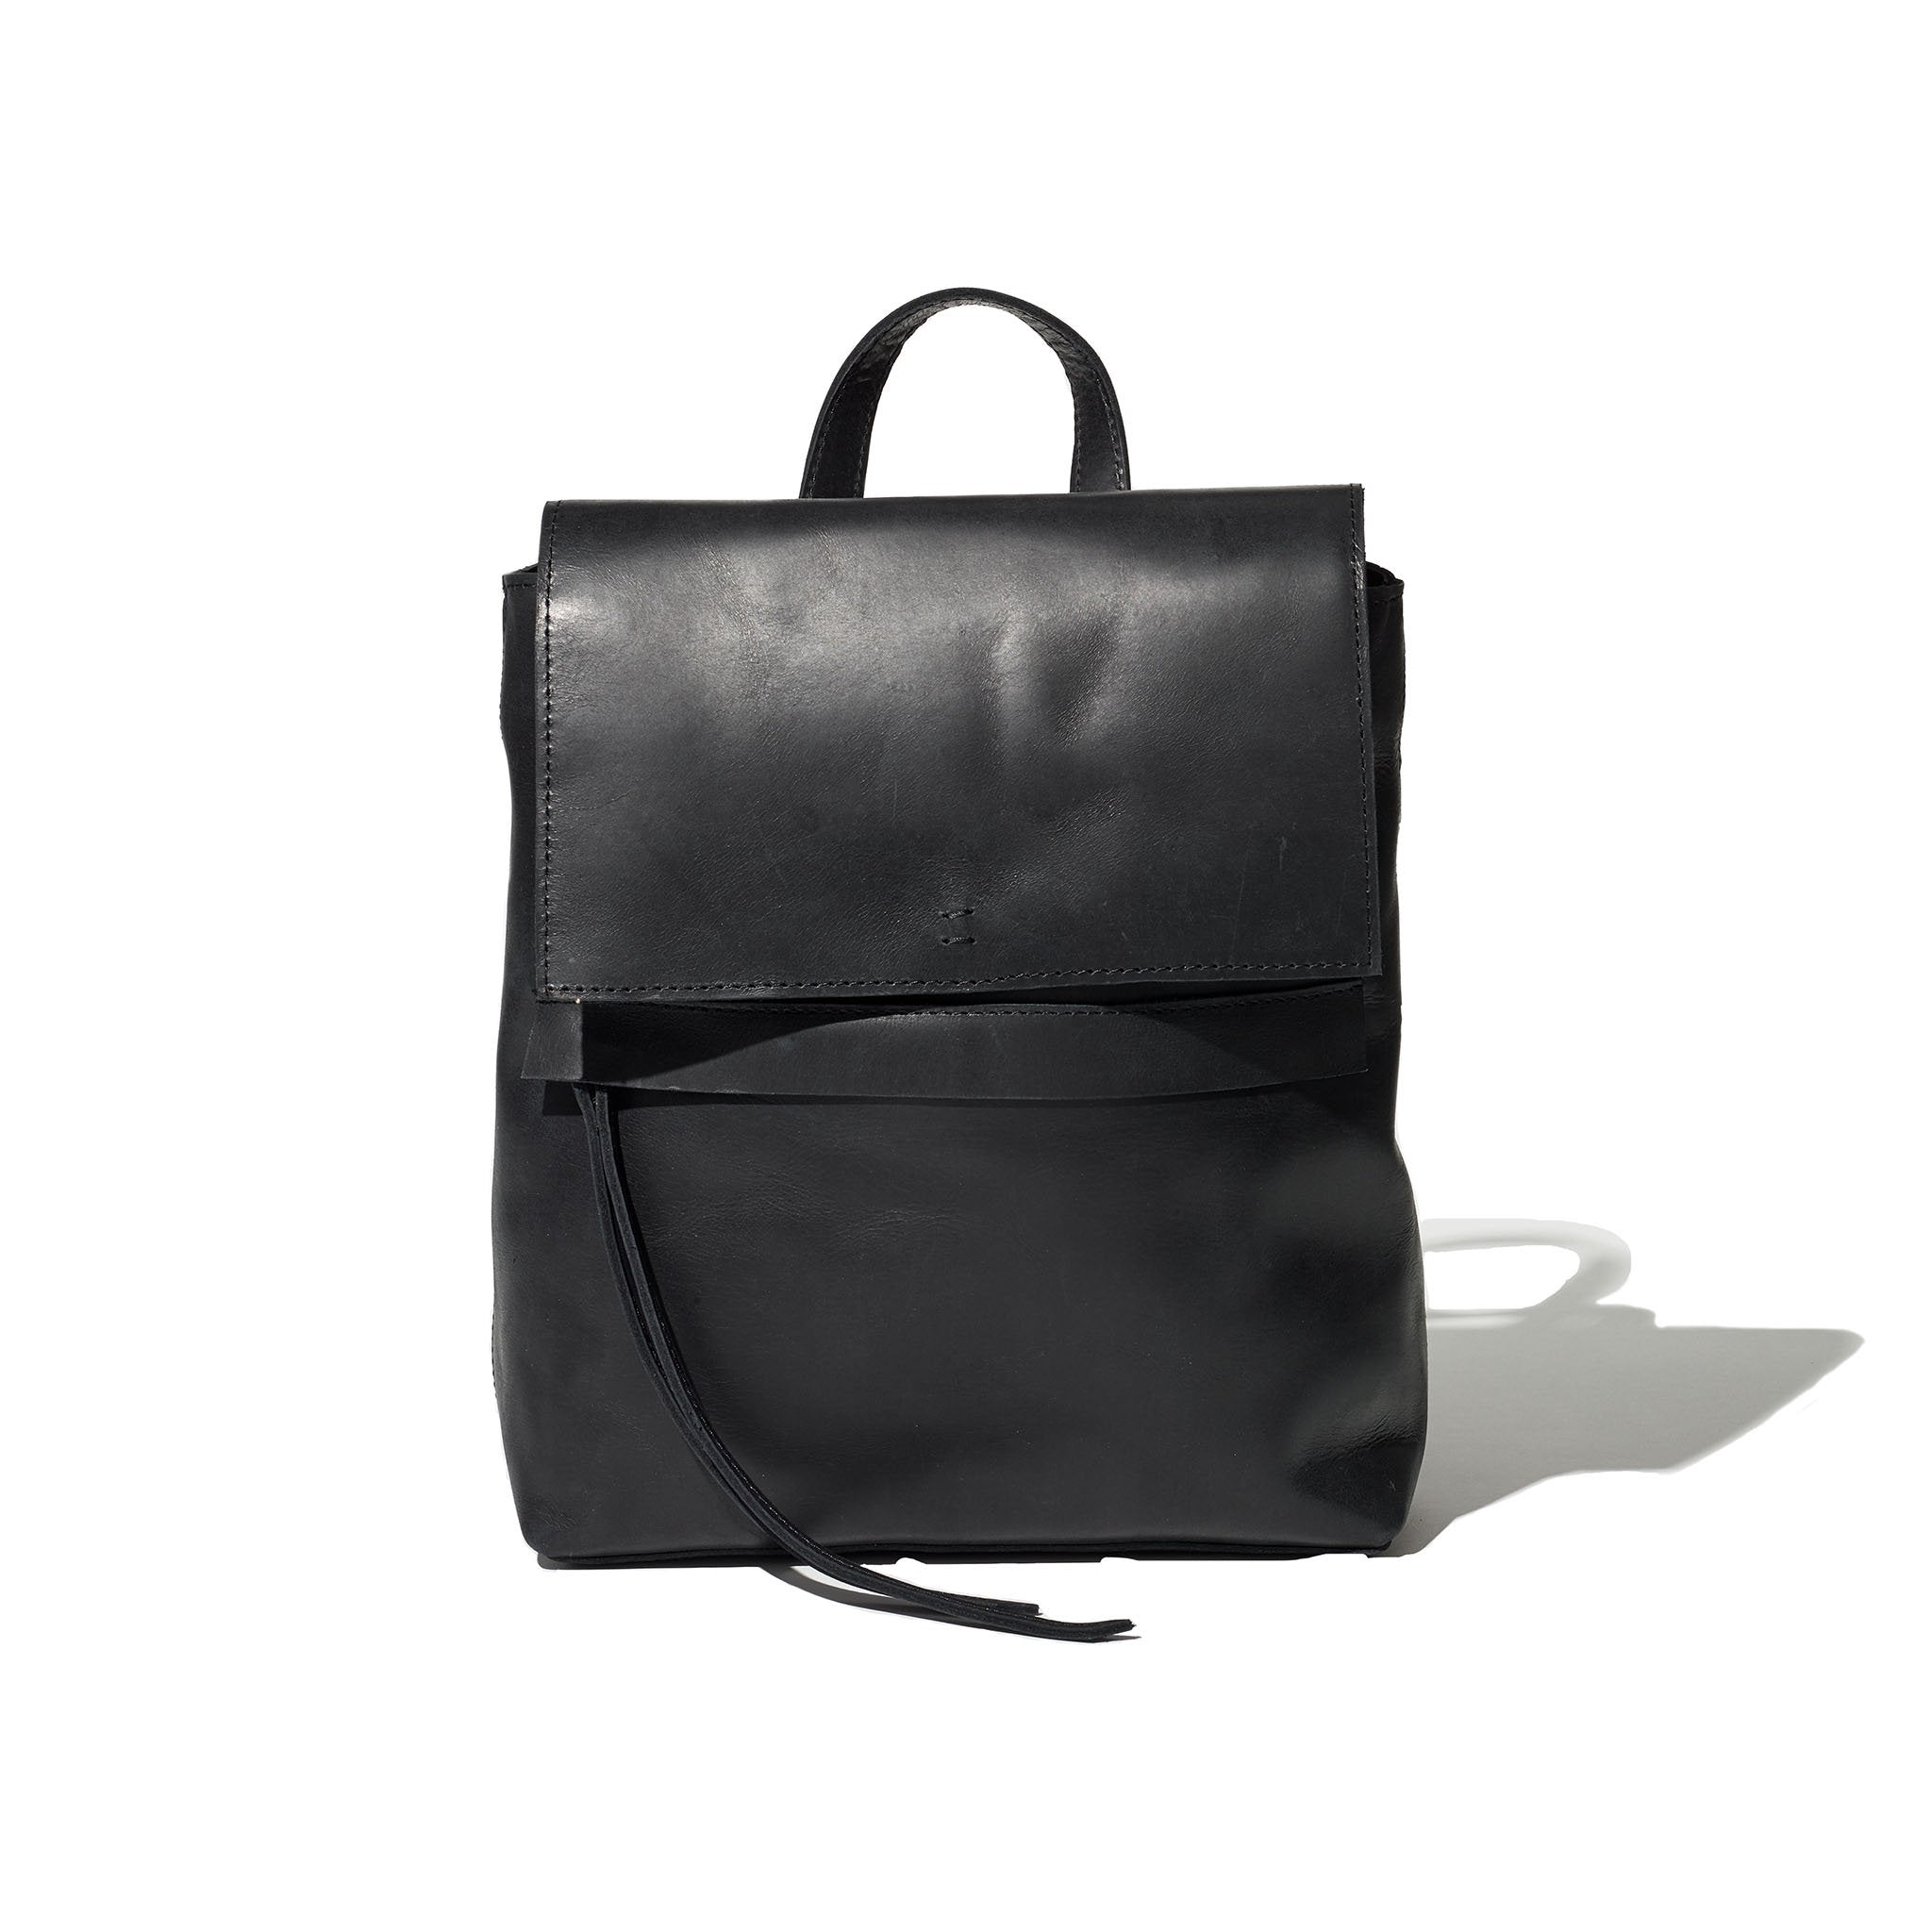 Black backpack handcrafted from sustainable Ethiopian leather featuring a hand-loomed cotton lining and adjustable straps.